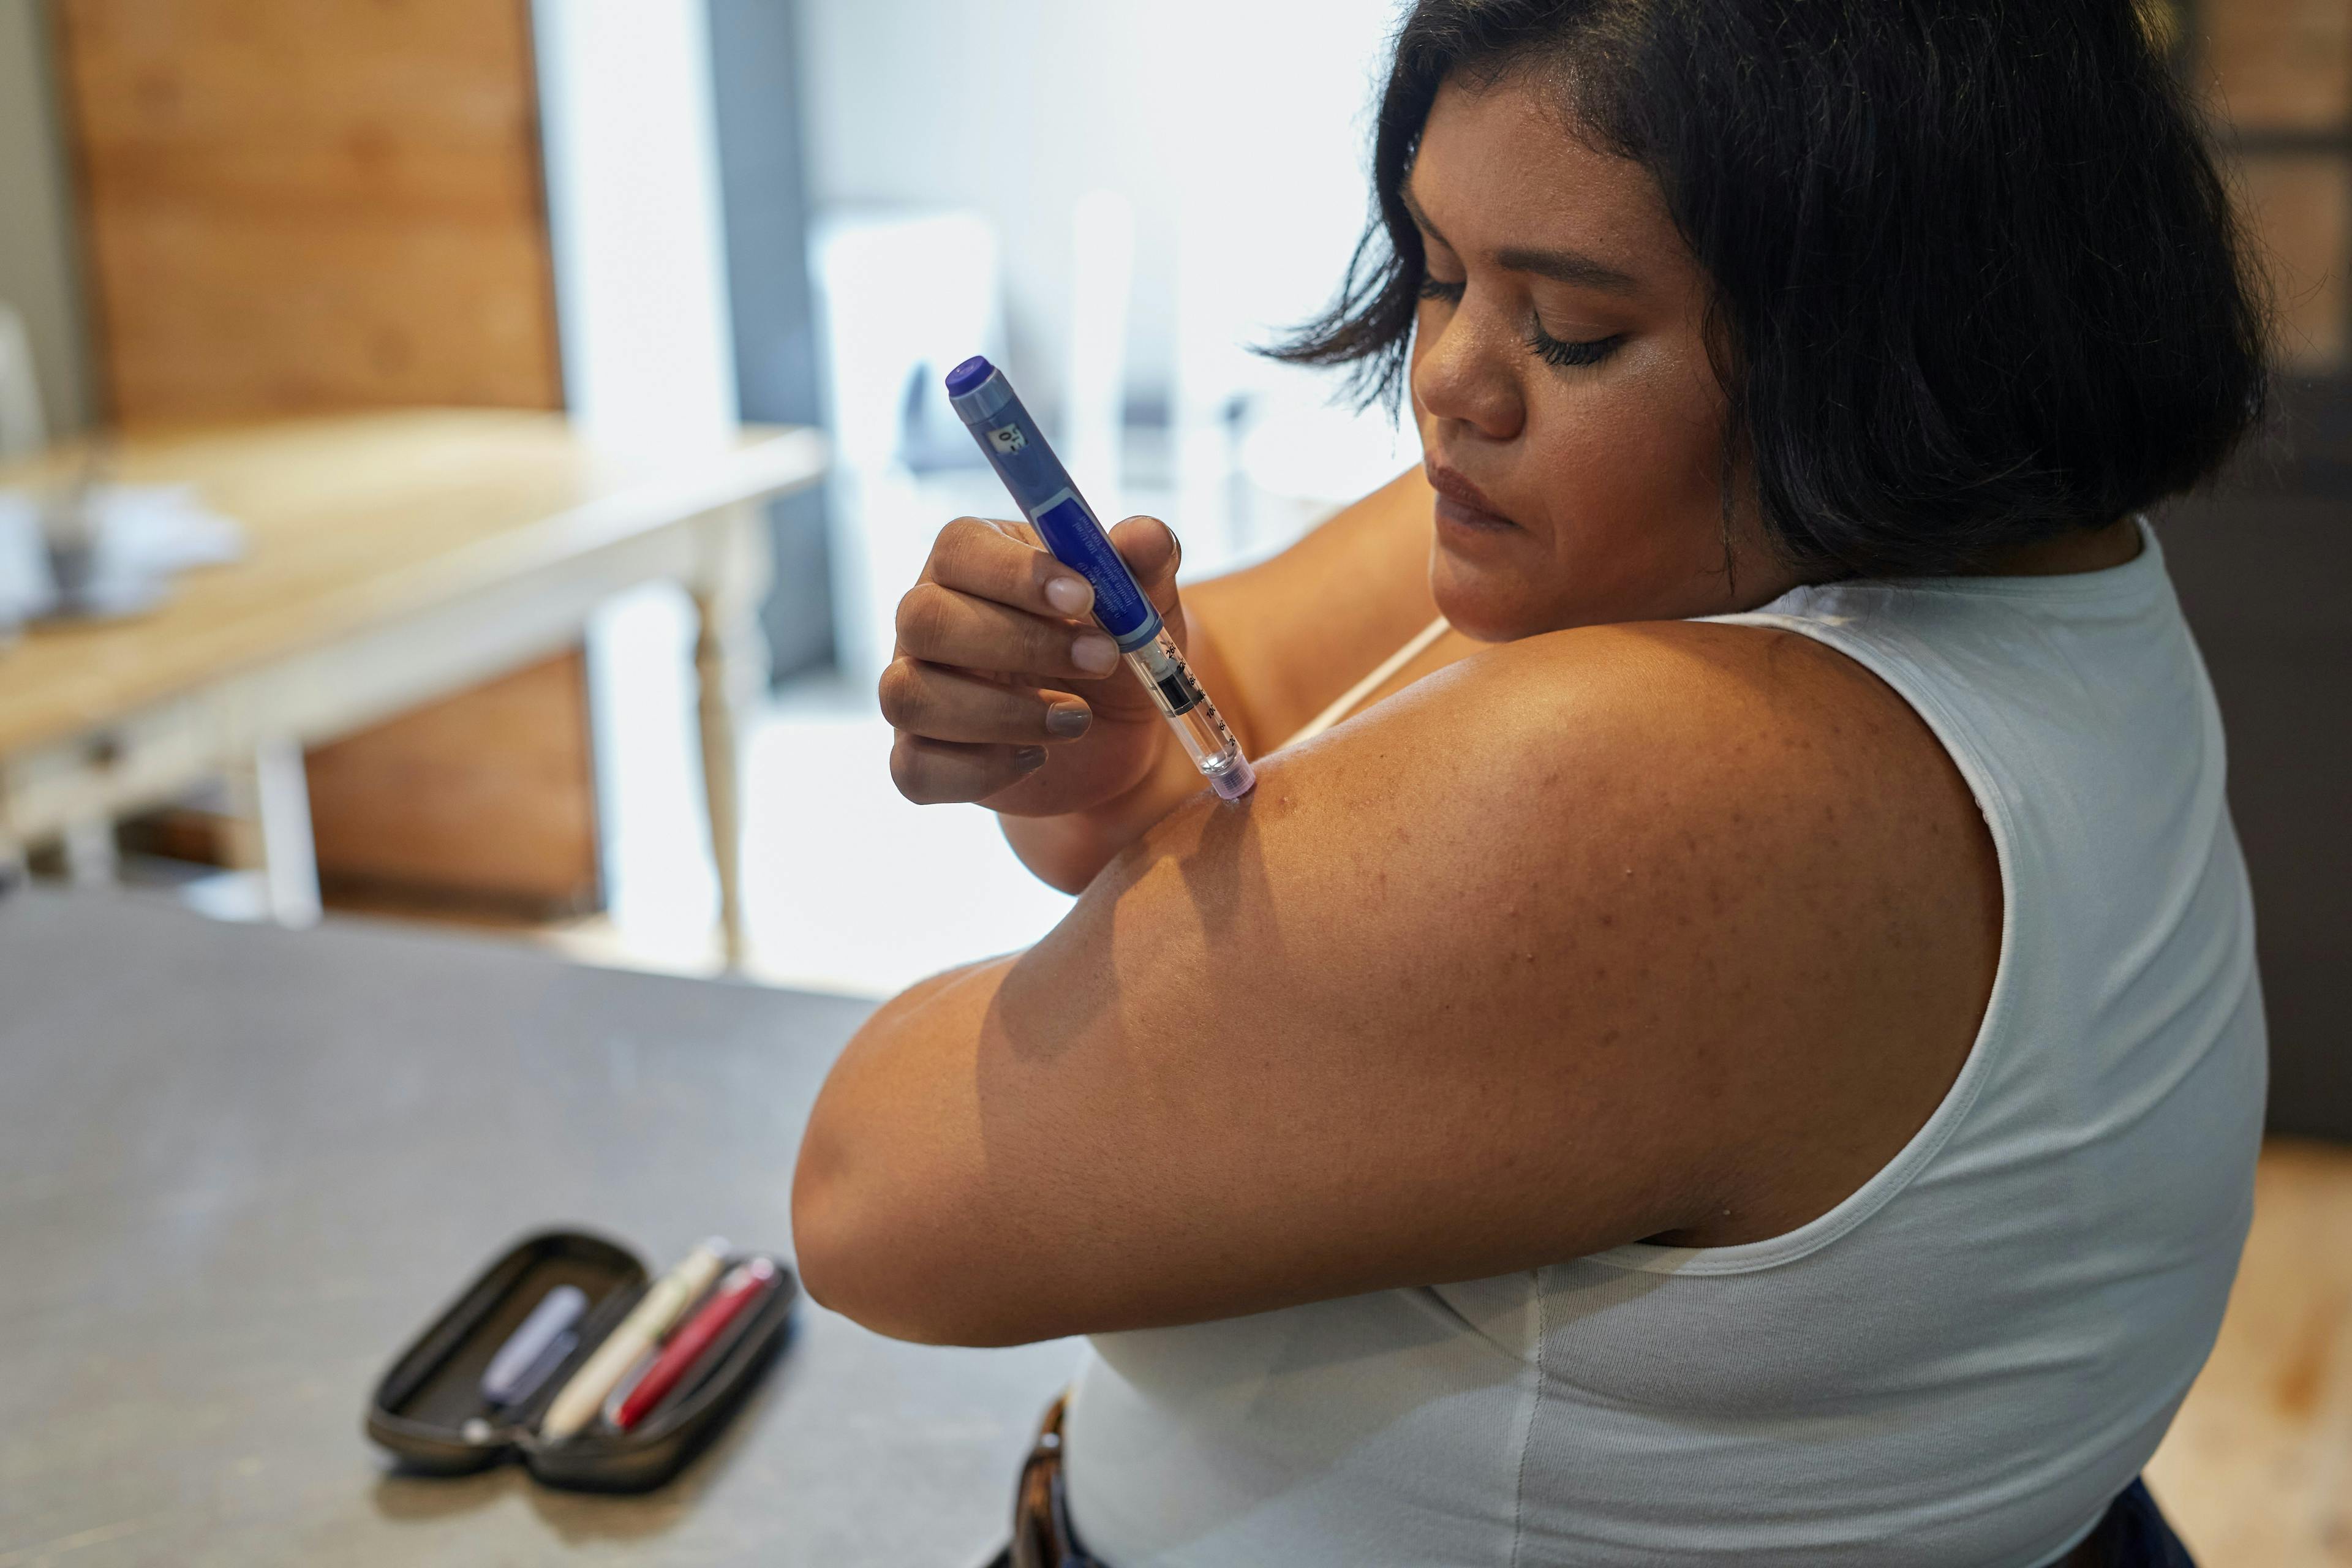 Young South African woman taking insulin for Type 1 diabetes with an insulin injection pen.